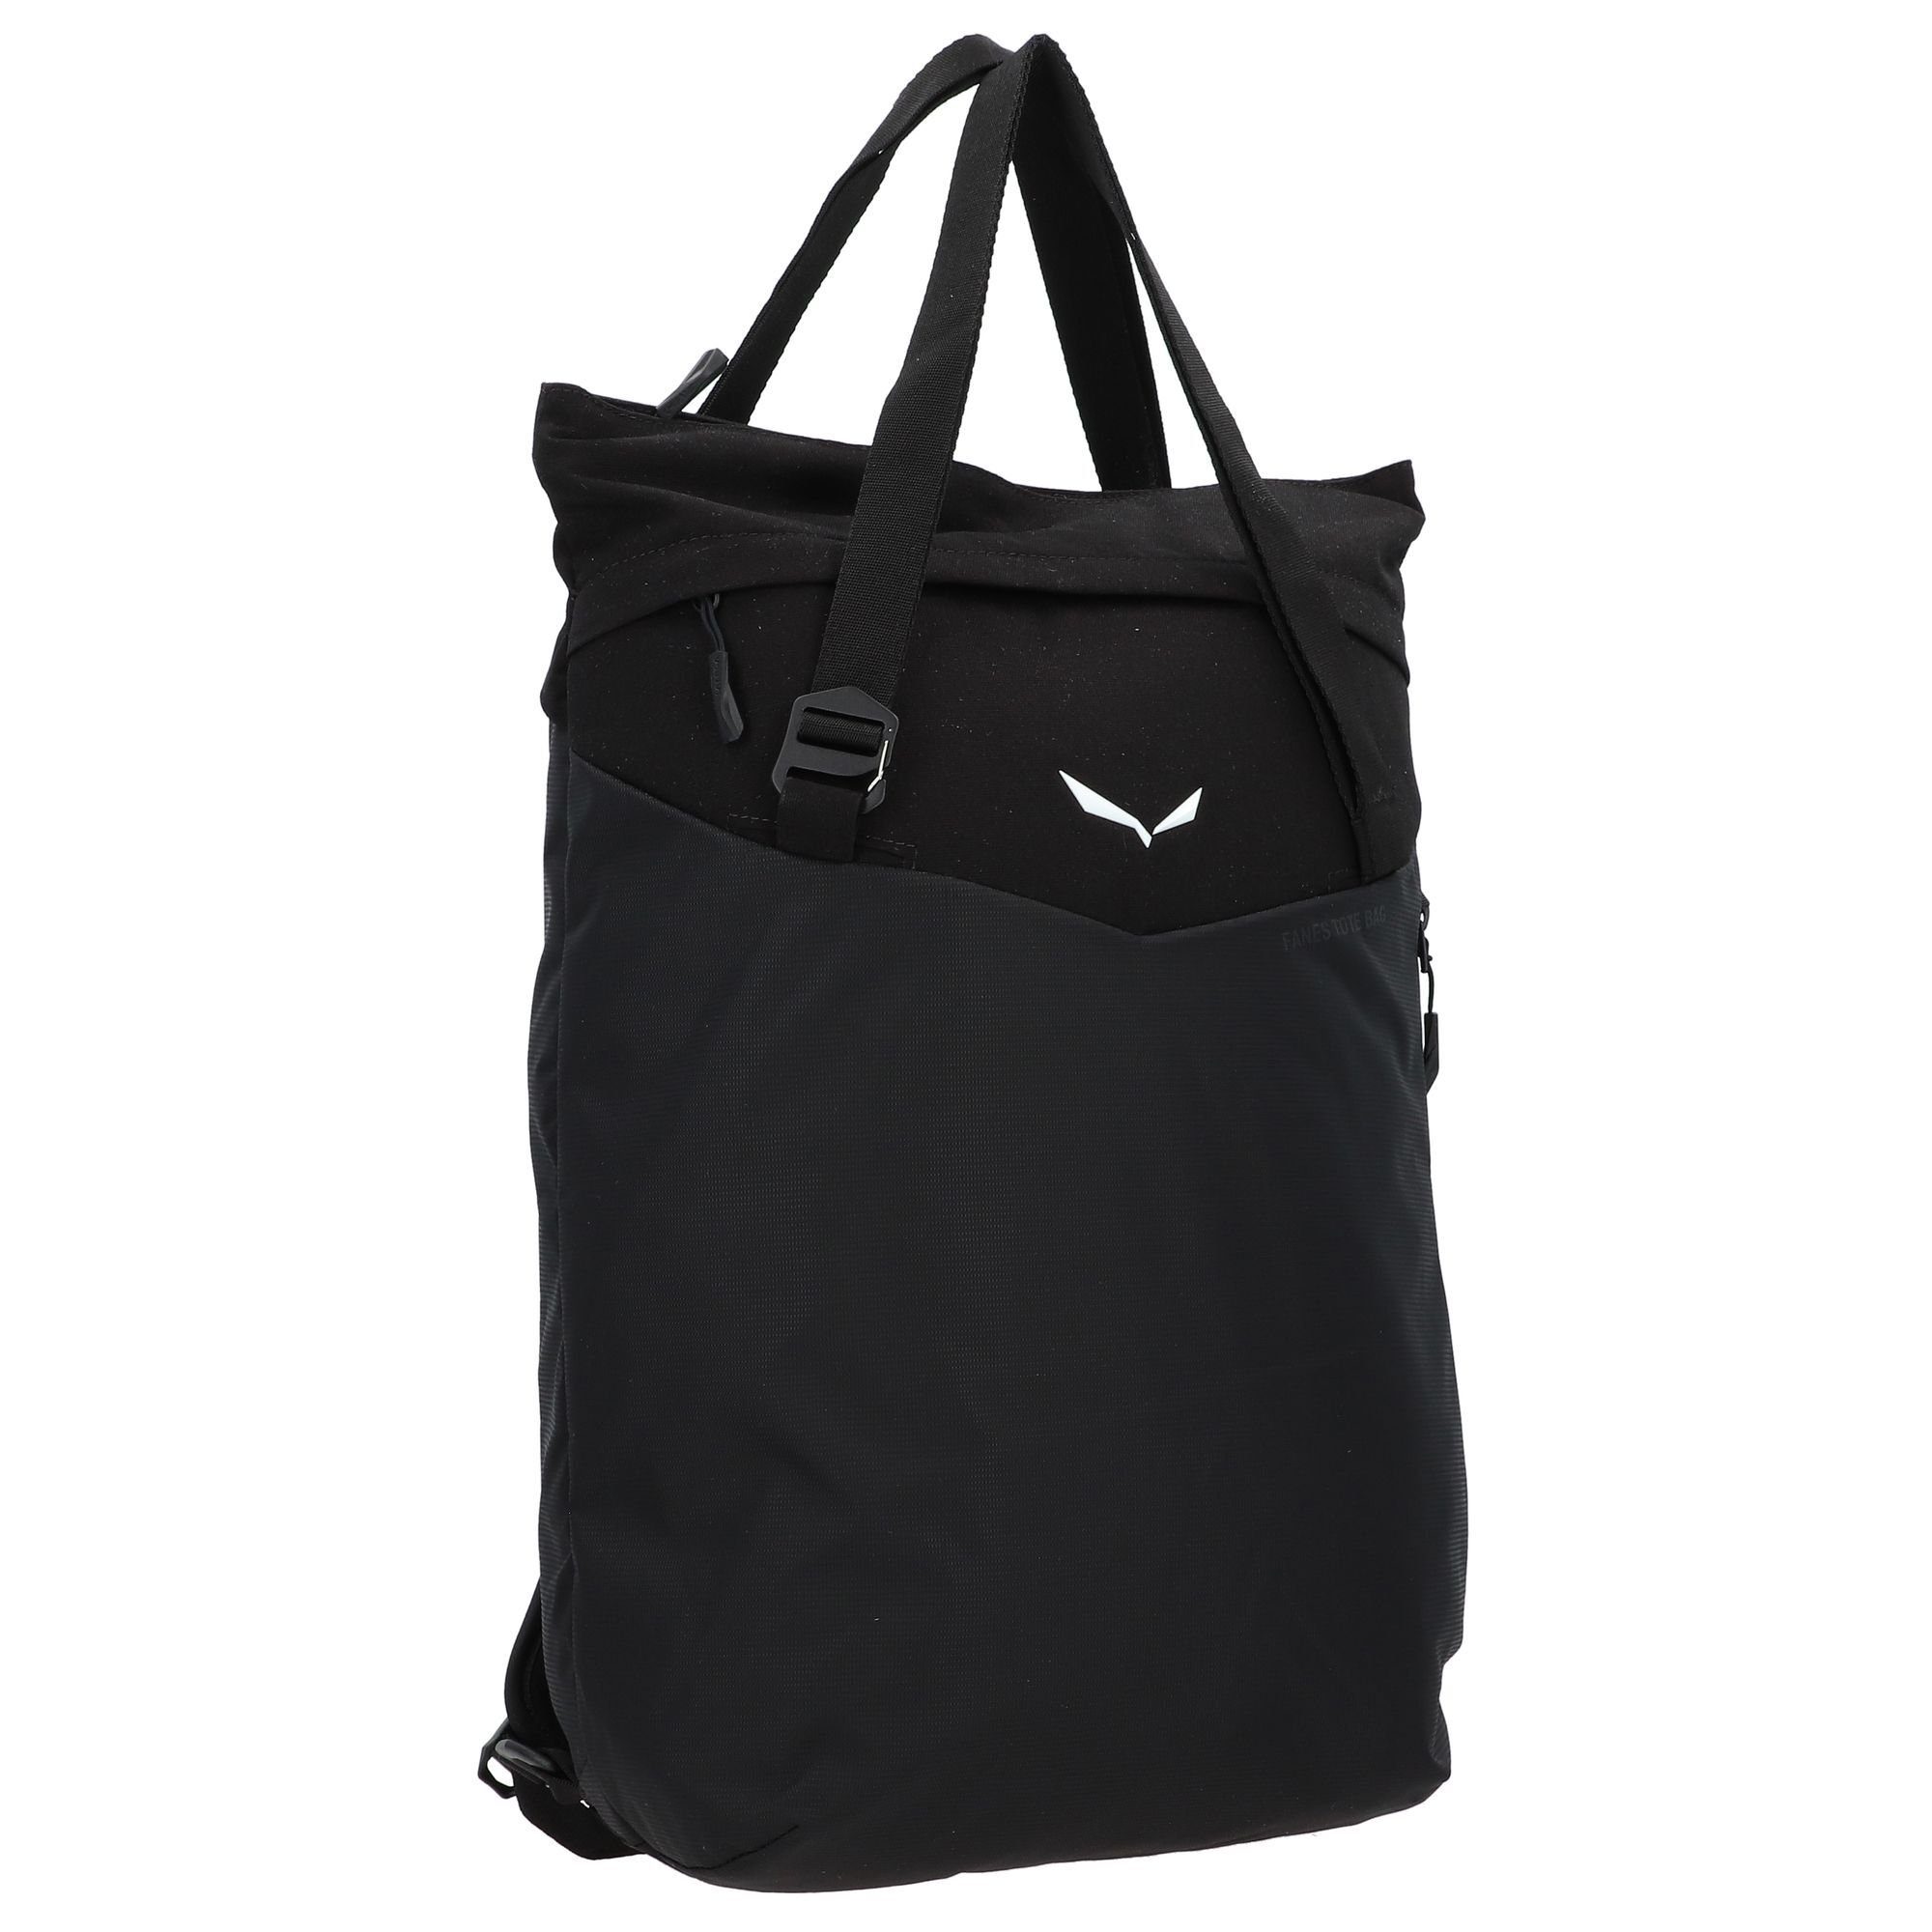 Polyester out Salewa Fanes, black Schultertasche